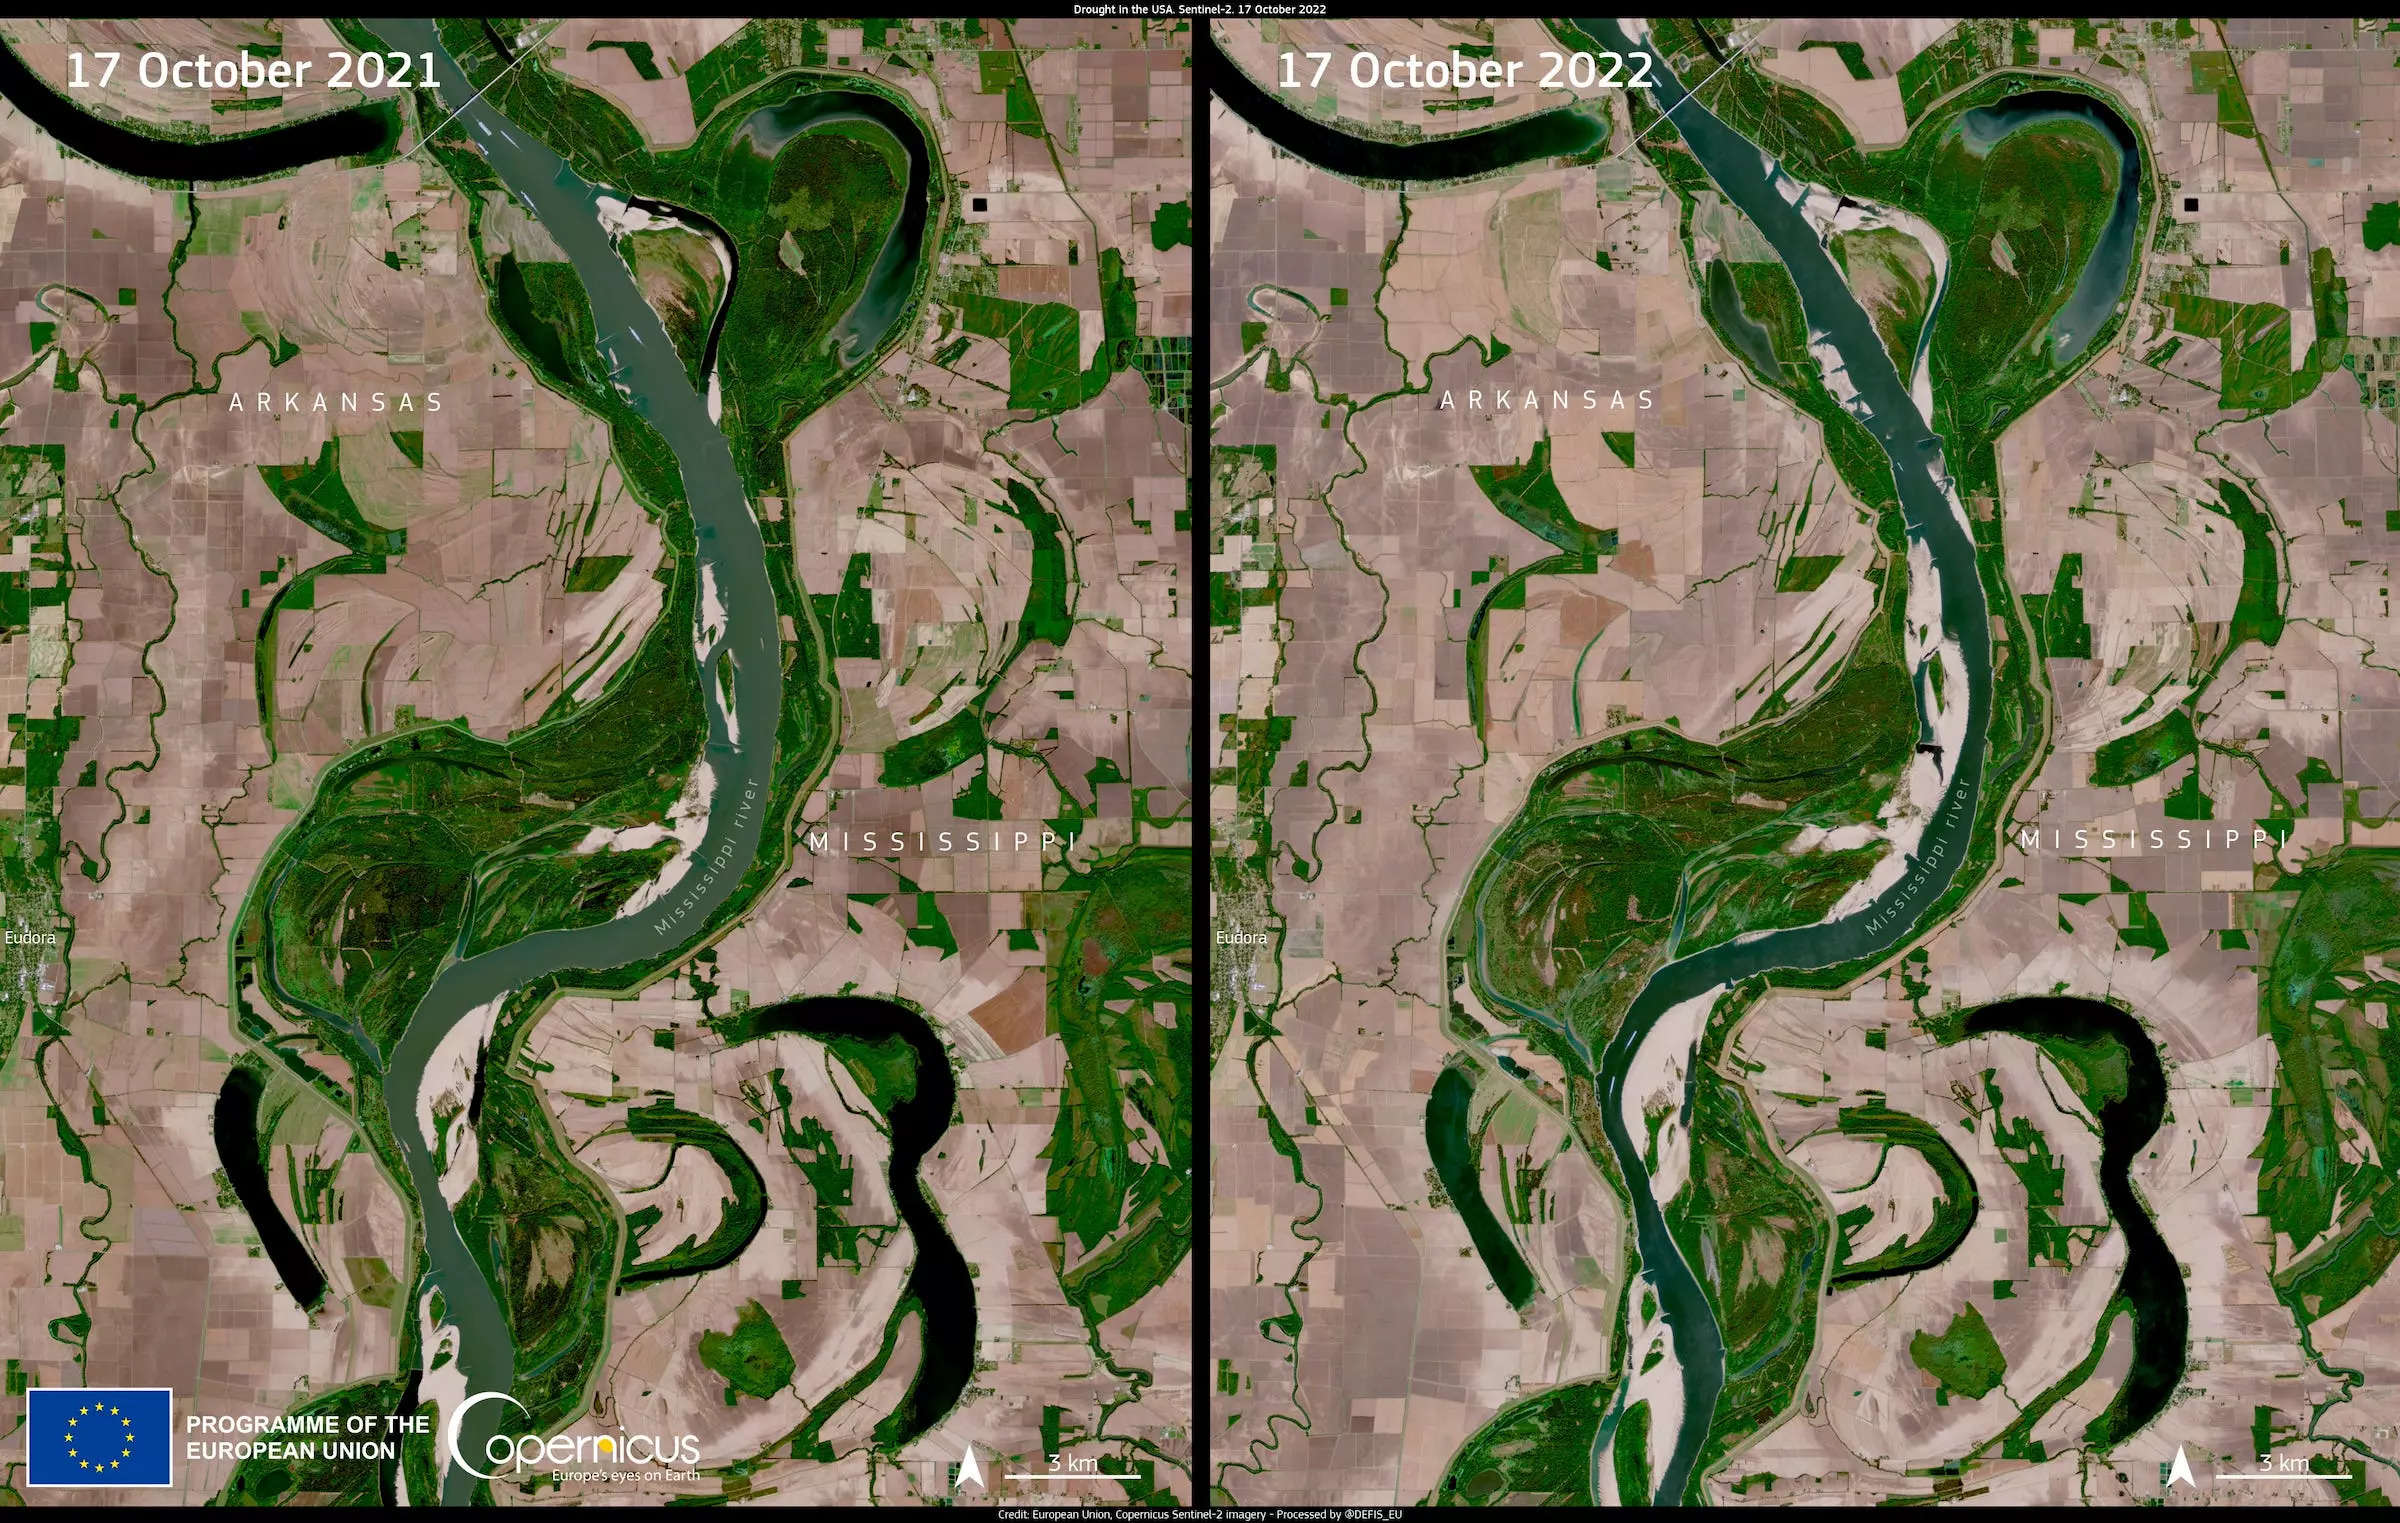 side by side satellite images show mississippi river in october 2021 and october 2022 with much more dry earth